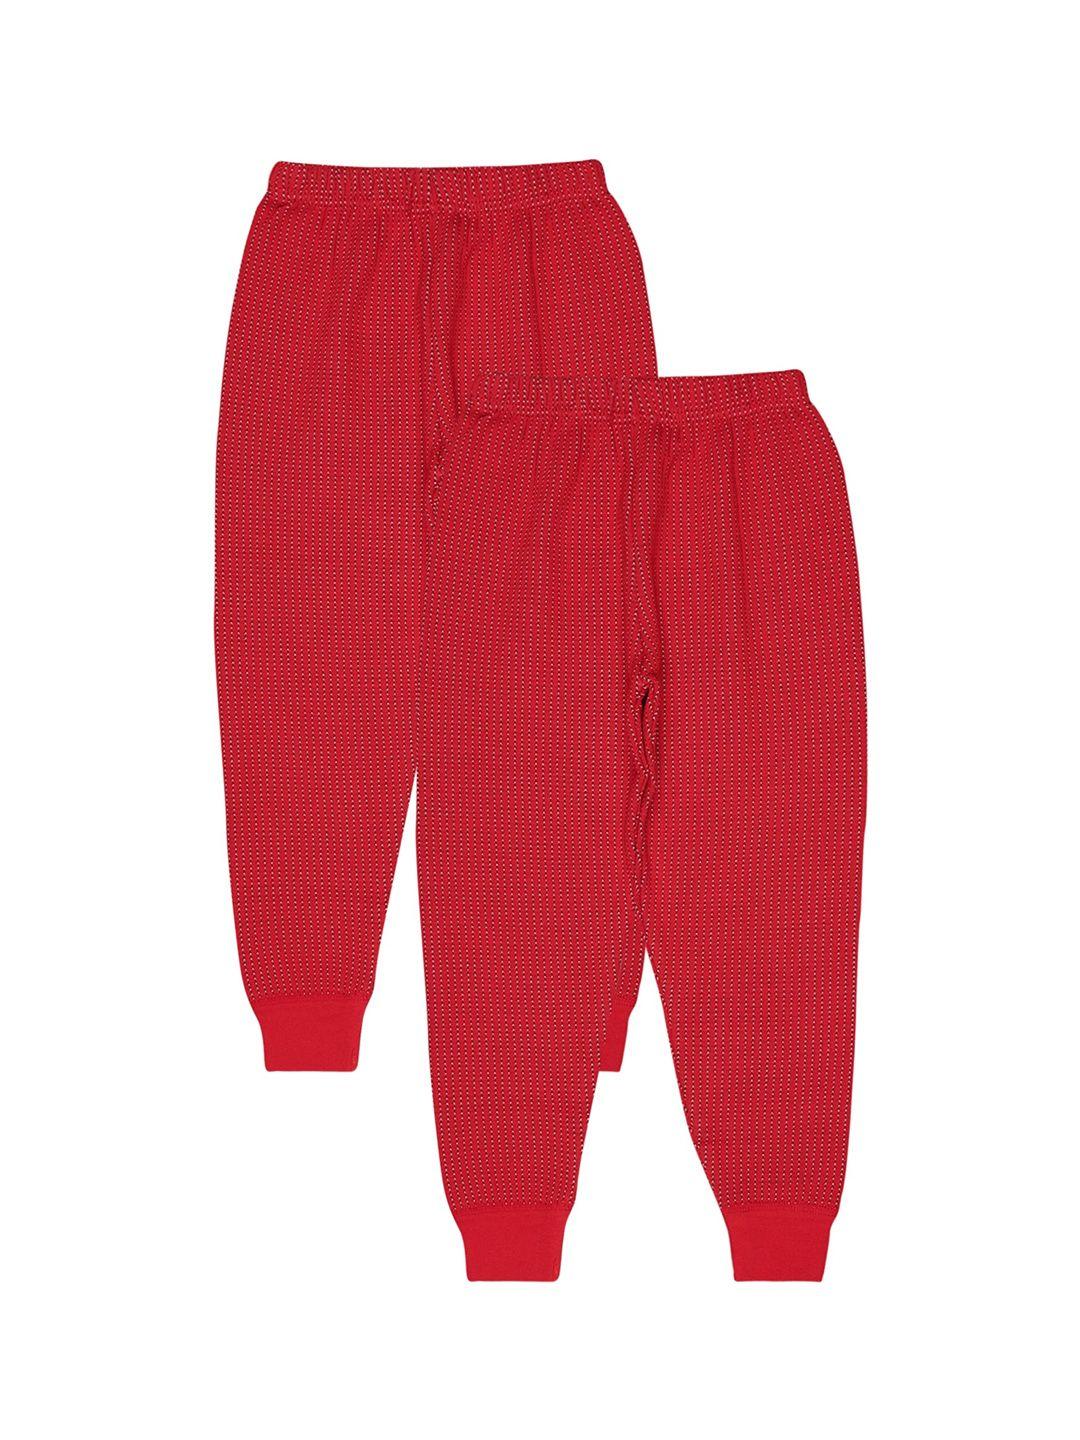 bodycare insider kids pack of 2 ribbed thermal bottoms